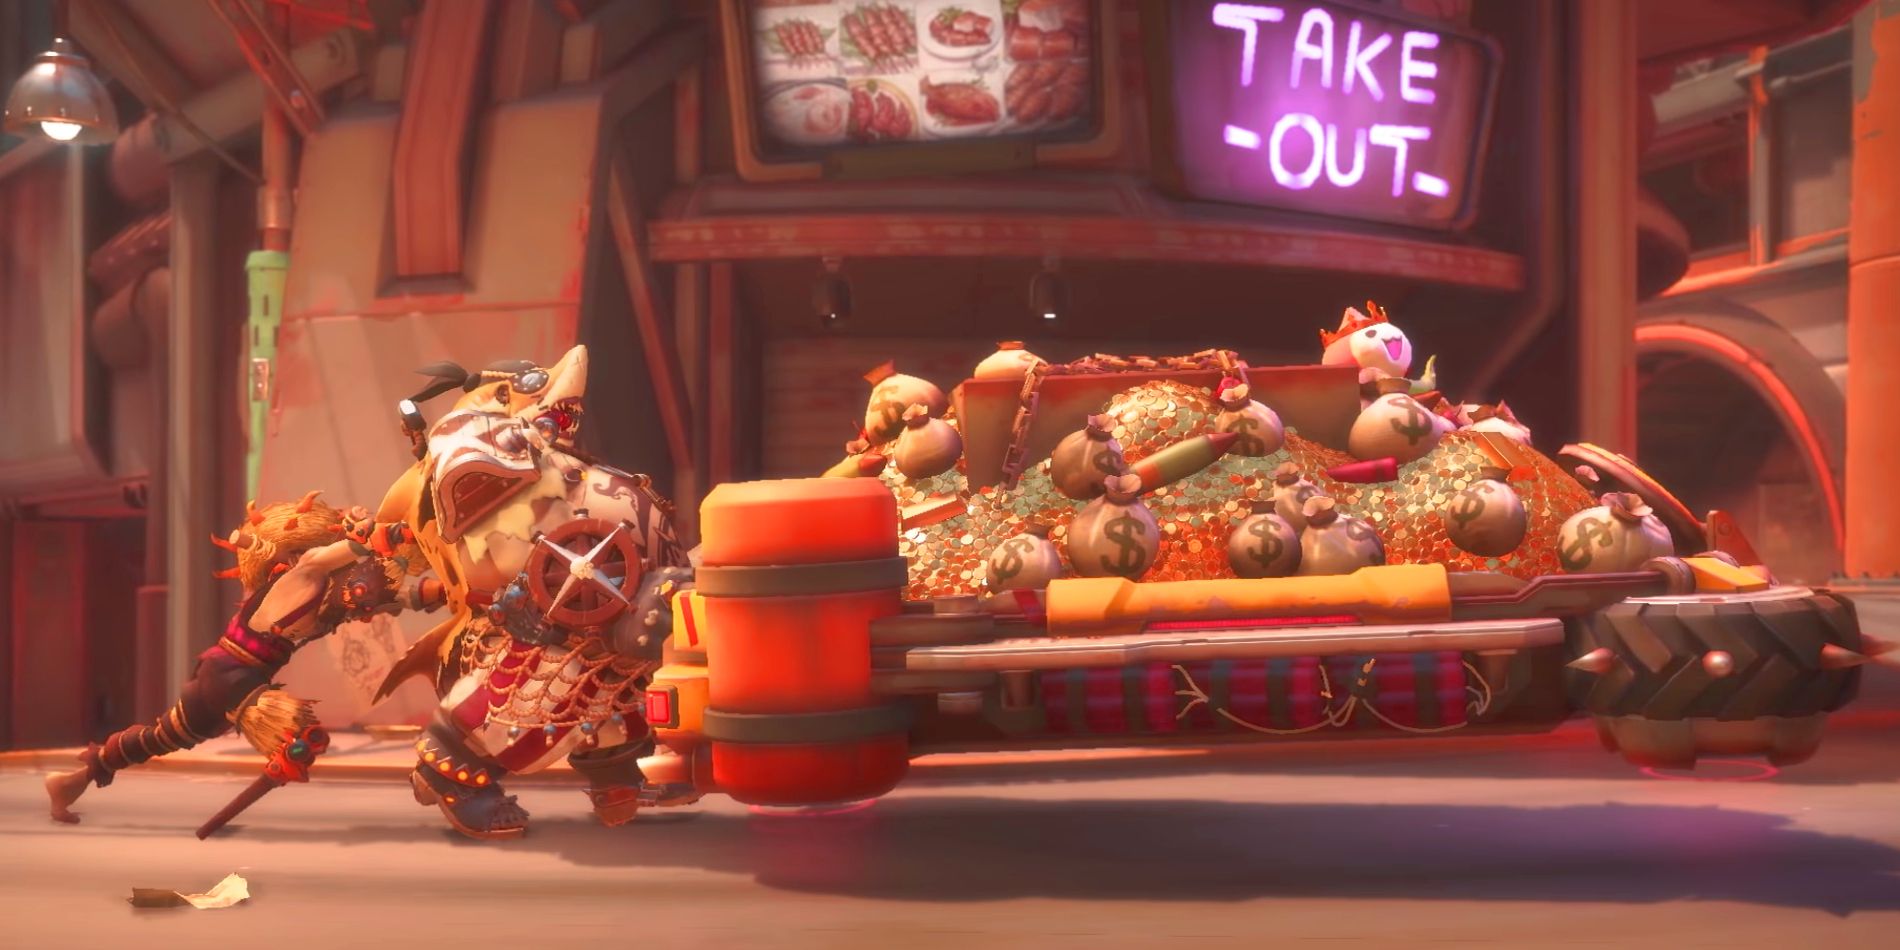 Overwatch characters Junkrat and Roadhog are seen pushing a large cart filled with gold further into the Junkertown map while wearing Halloween skin disguises.